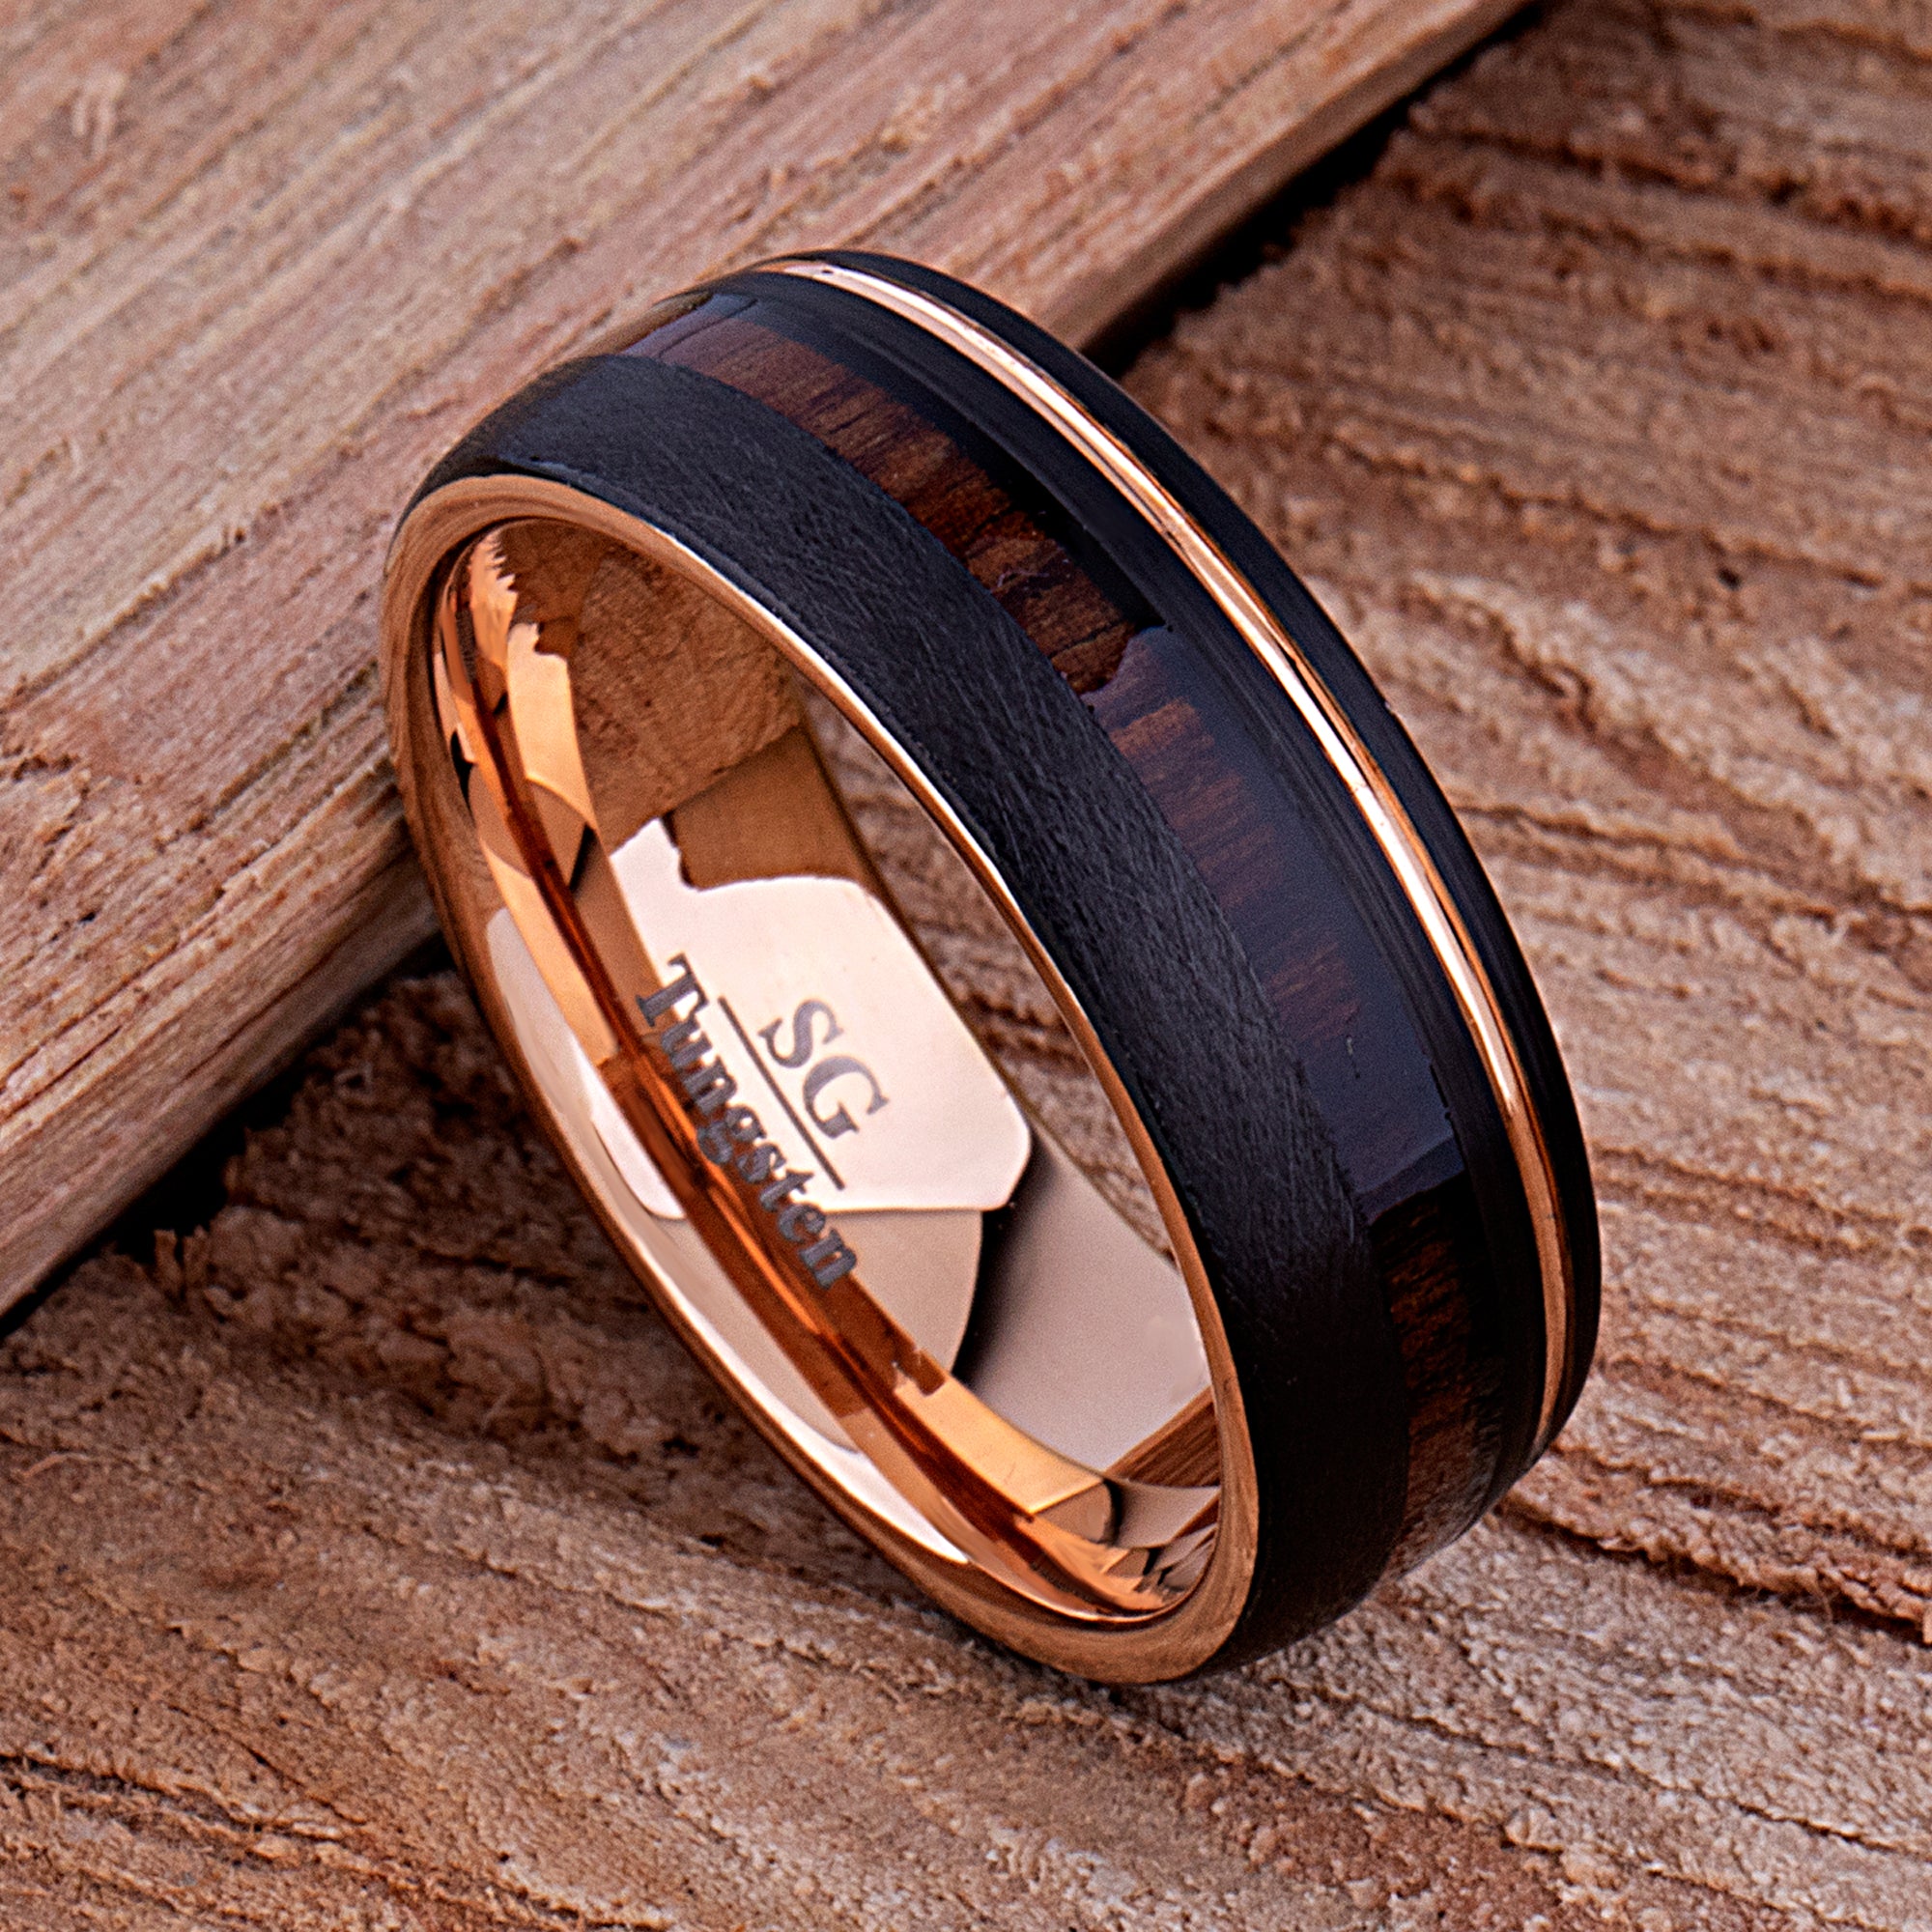 Tungsten Carbide Men's Wedding Band 8mm Wide with Black and Rose Gold Plating and Vietnamese Rosewood Inlay